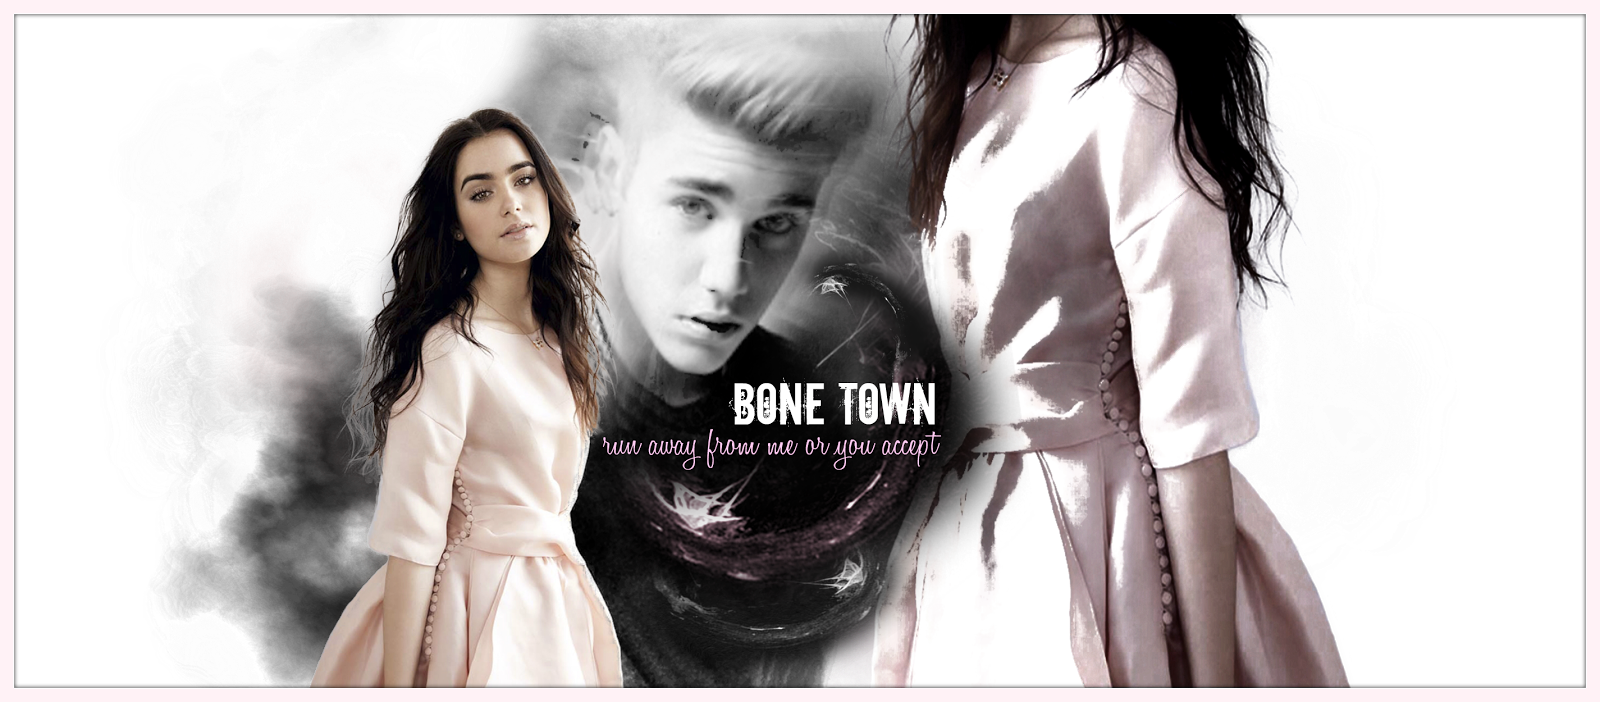 Bone town. Run away from me or you accept